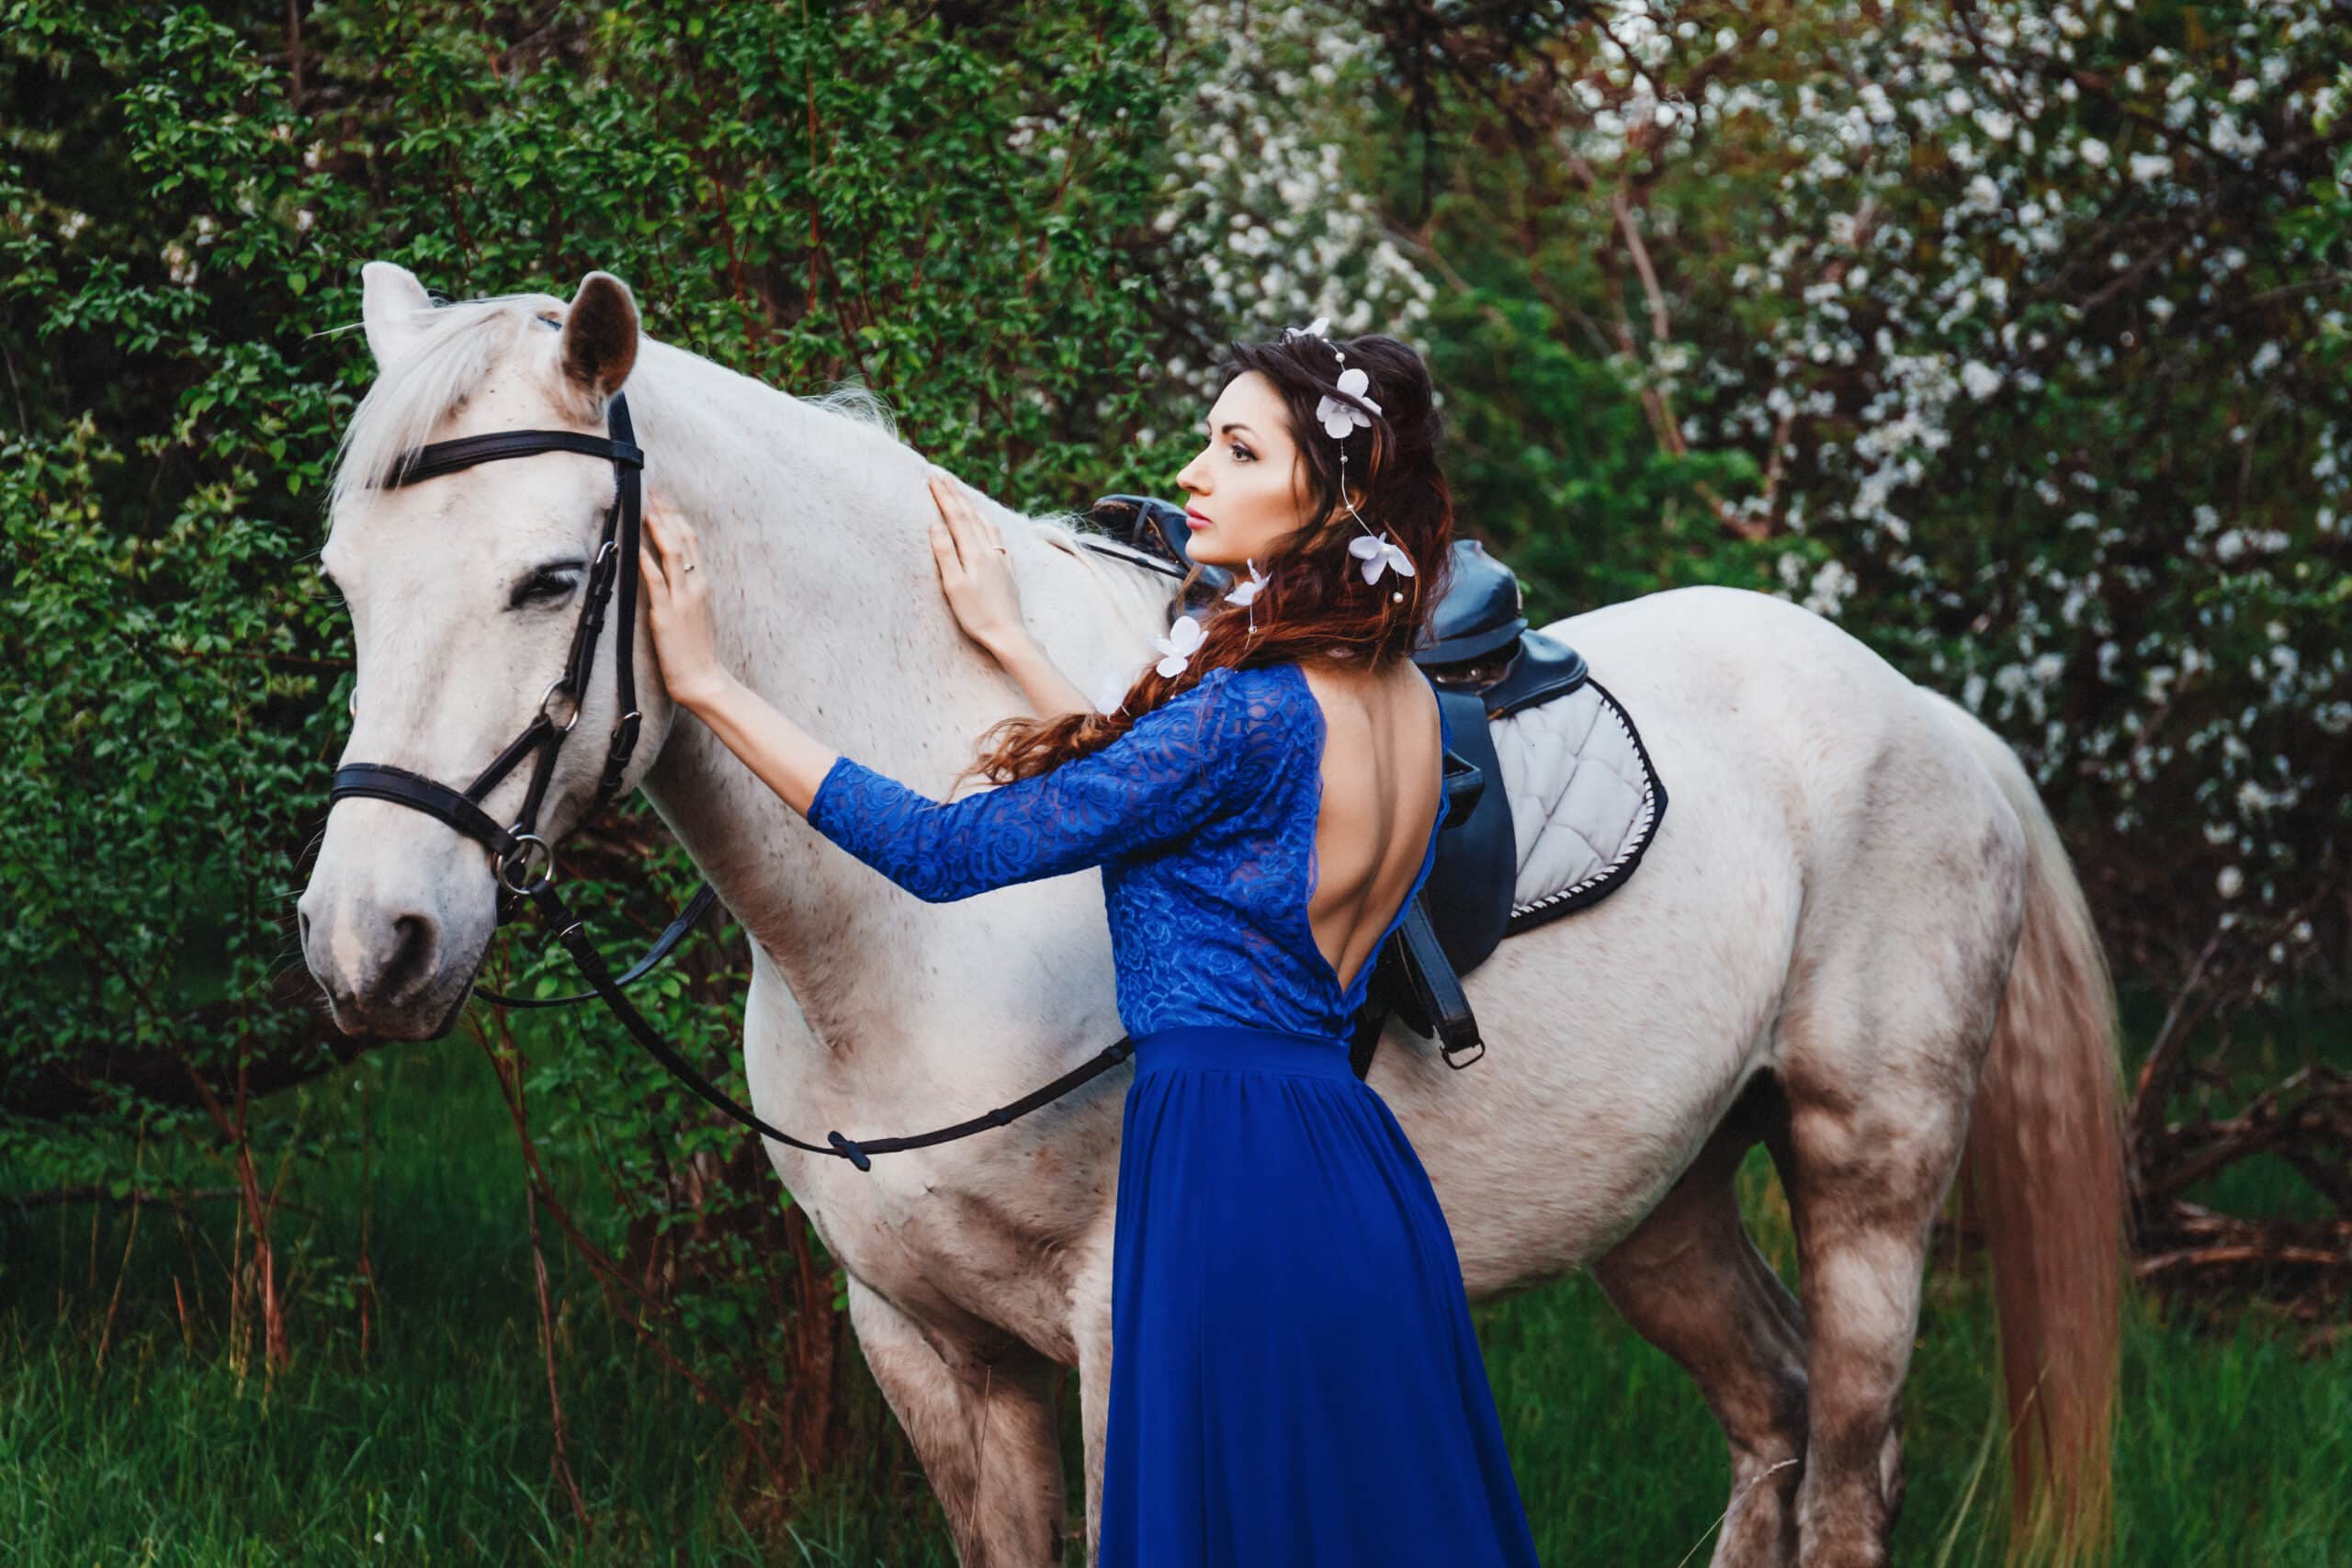 beautiful brunette woman in blue dress standing next to a white horse in spring.